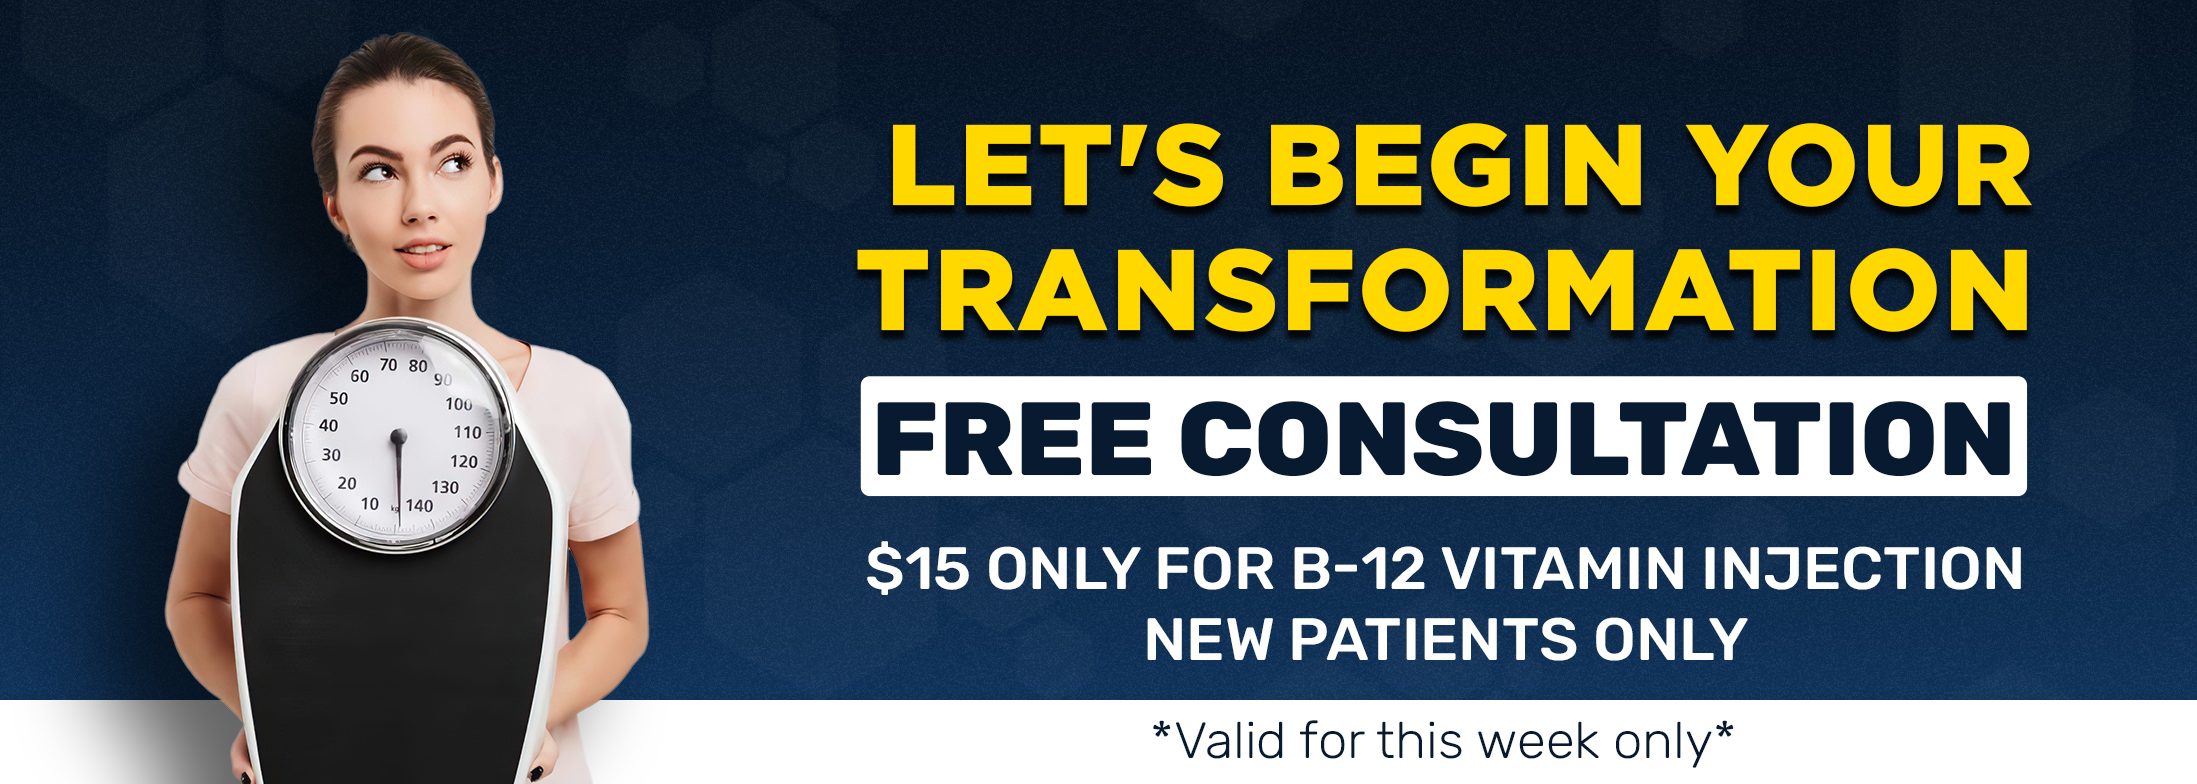 Free Consultation, $15 Only for B-12 vitamin injection. New patients only